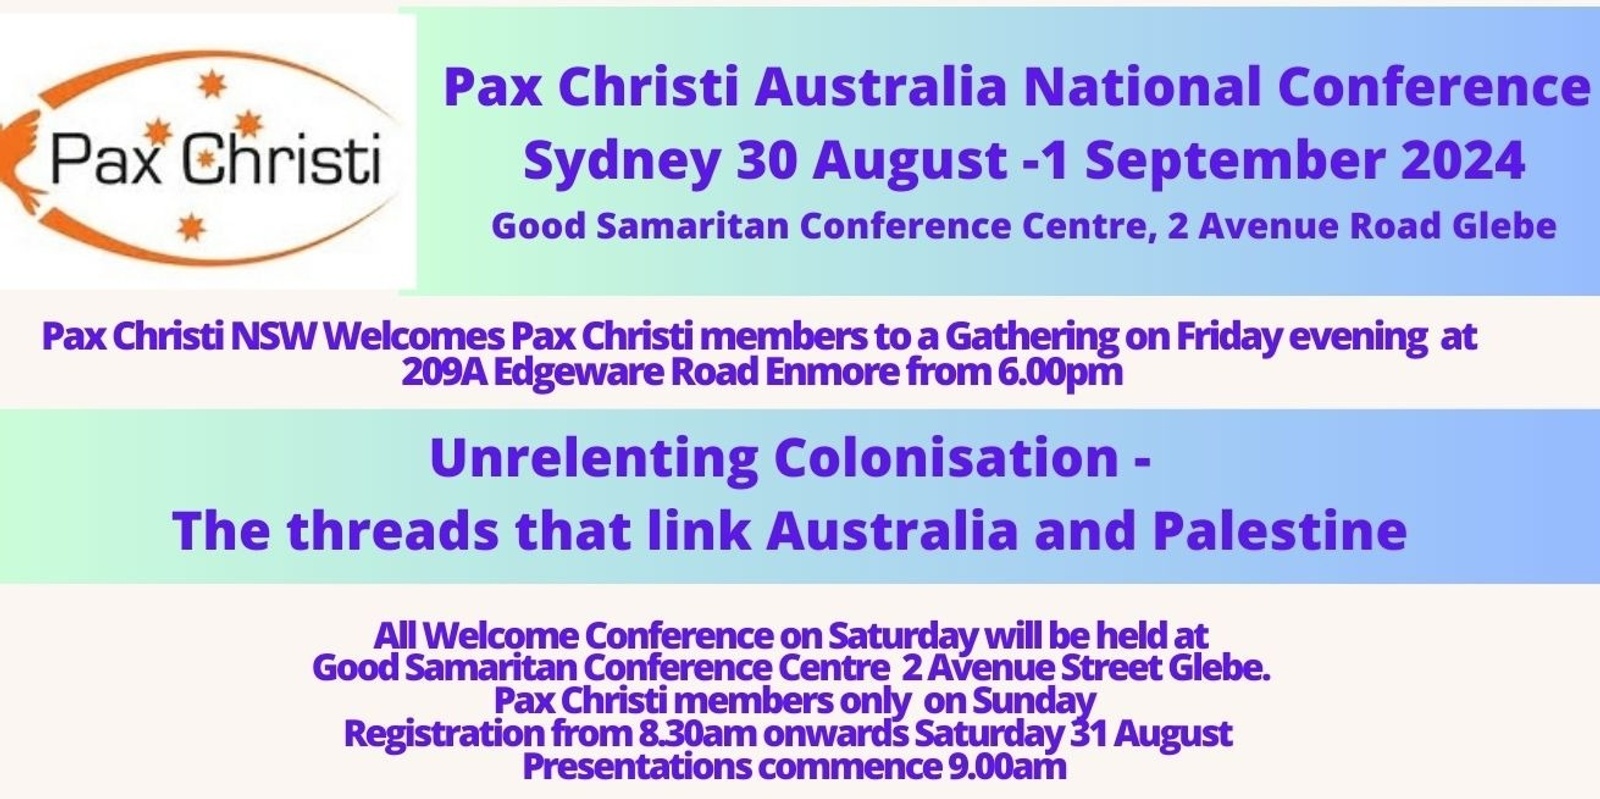 Banner image for PAX CHRISTI AUSTRALIA NATIONAL CONFERENCE 2024